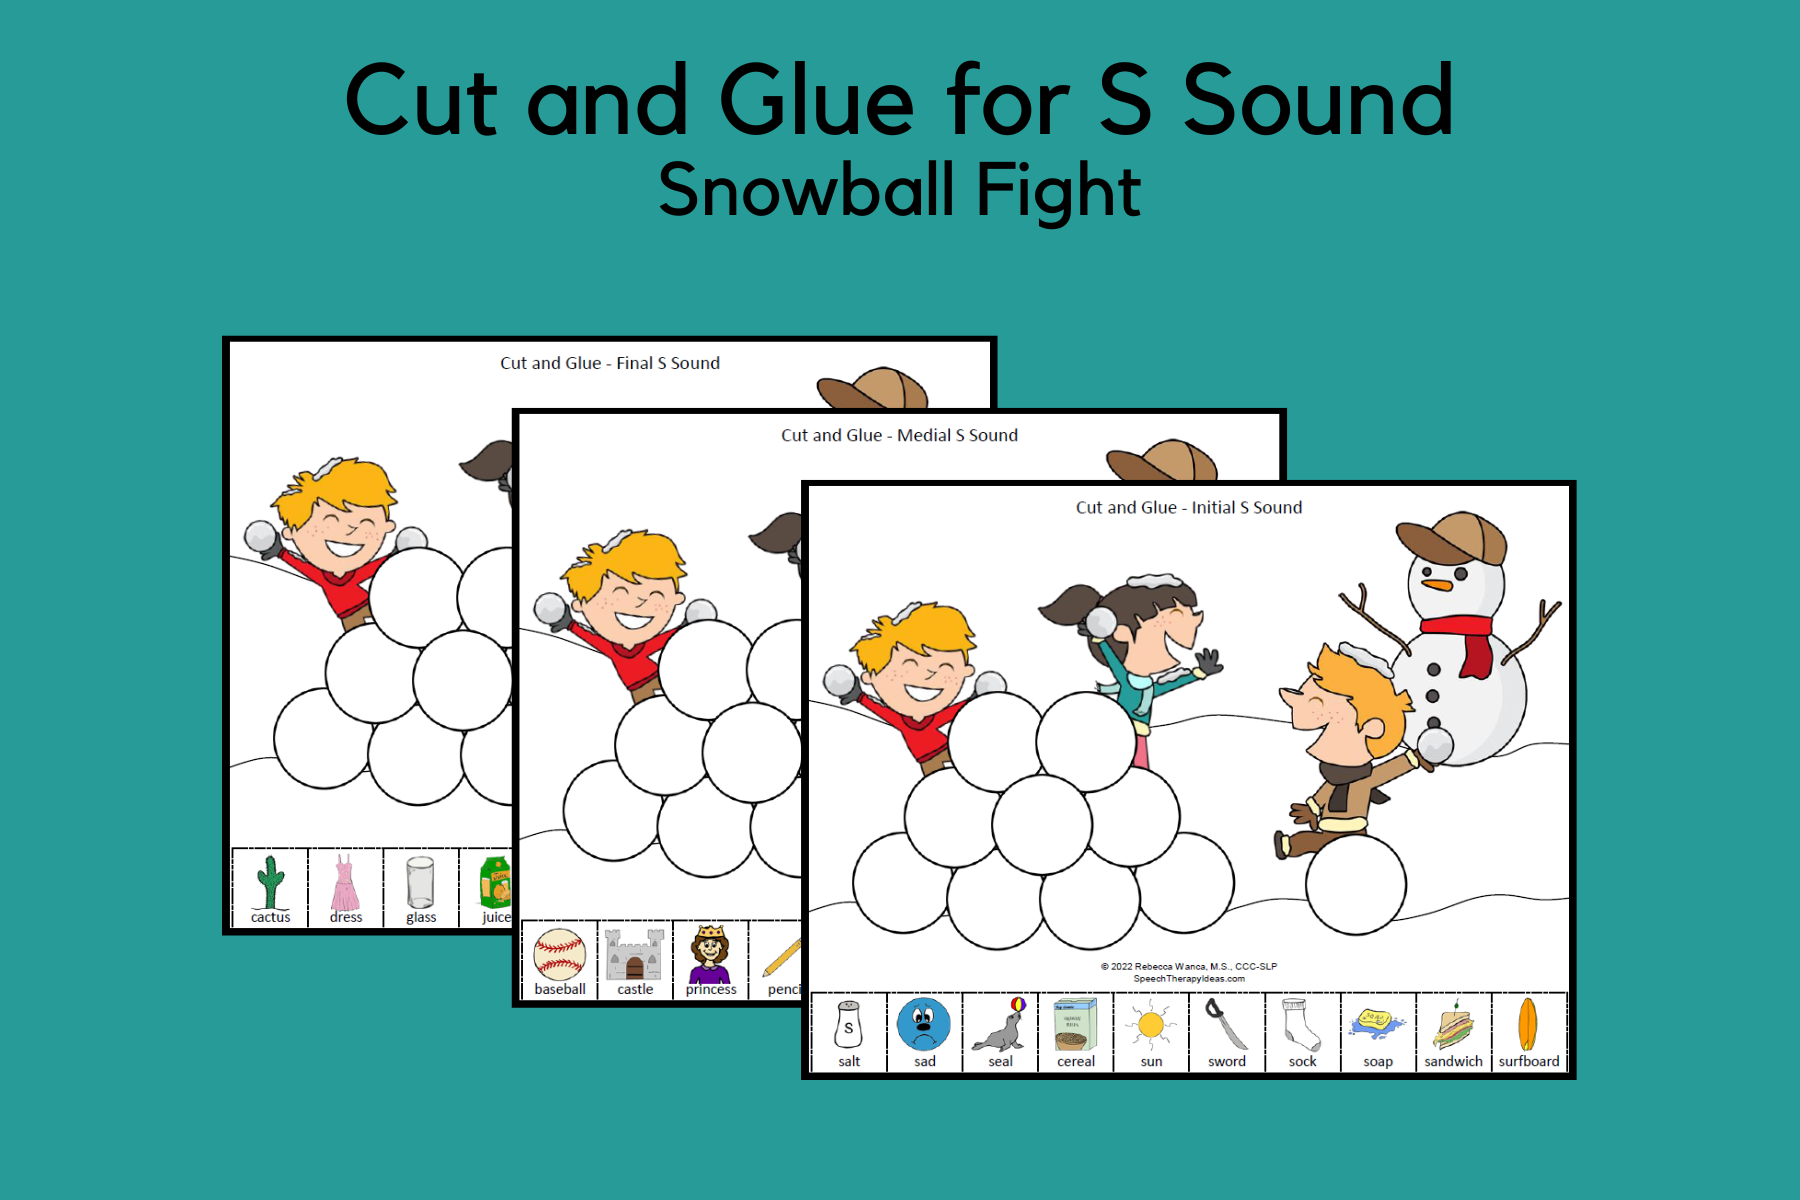 Cut and Glue for S Sound - Snowball Fight